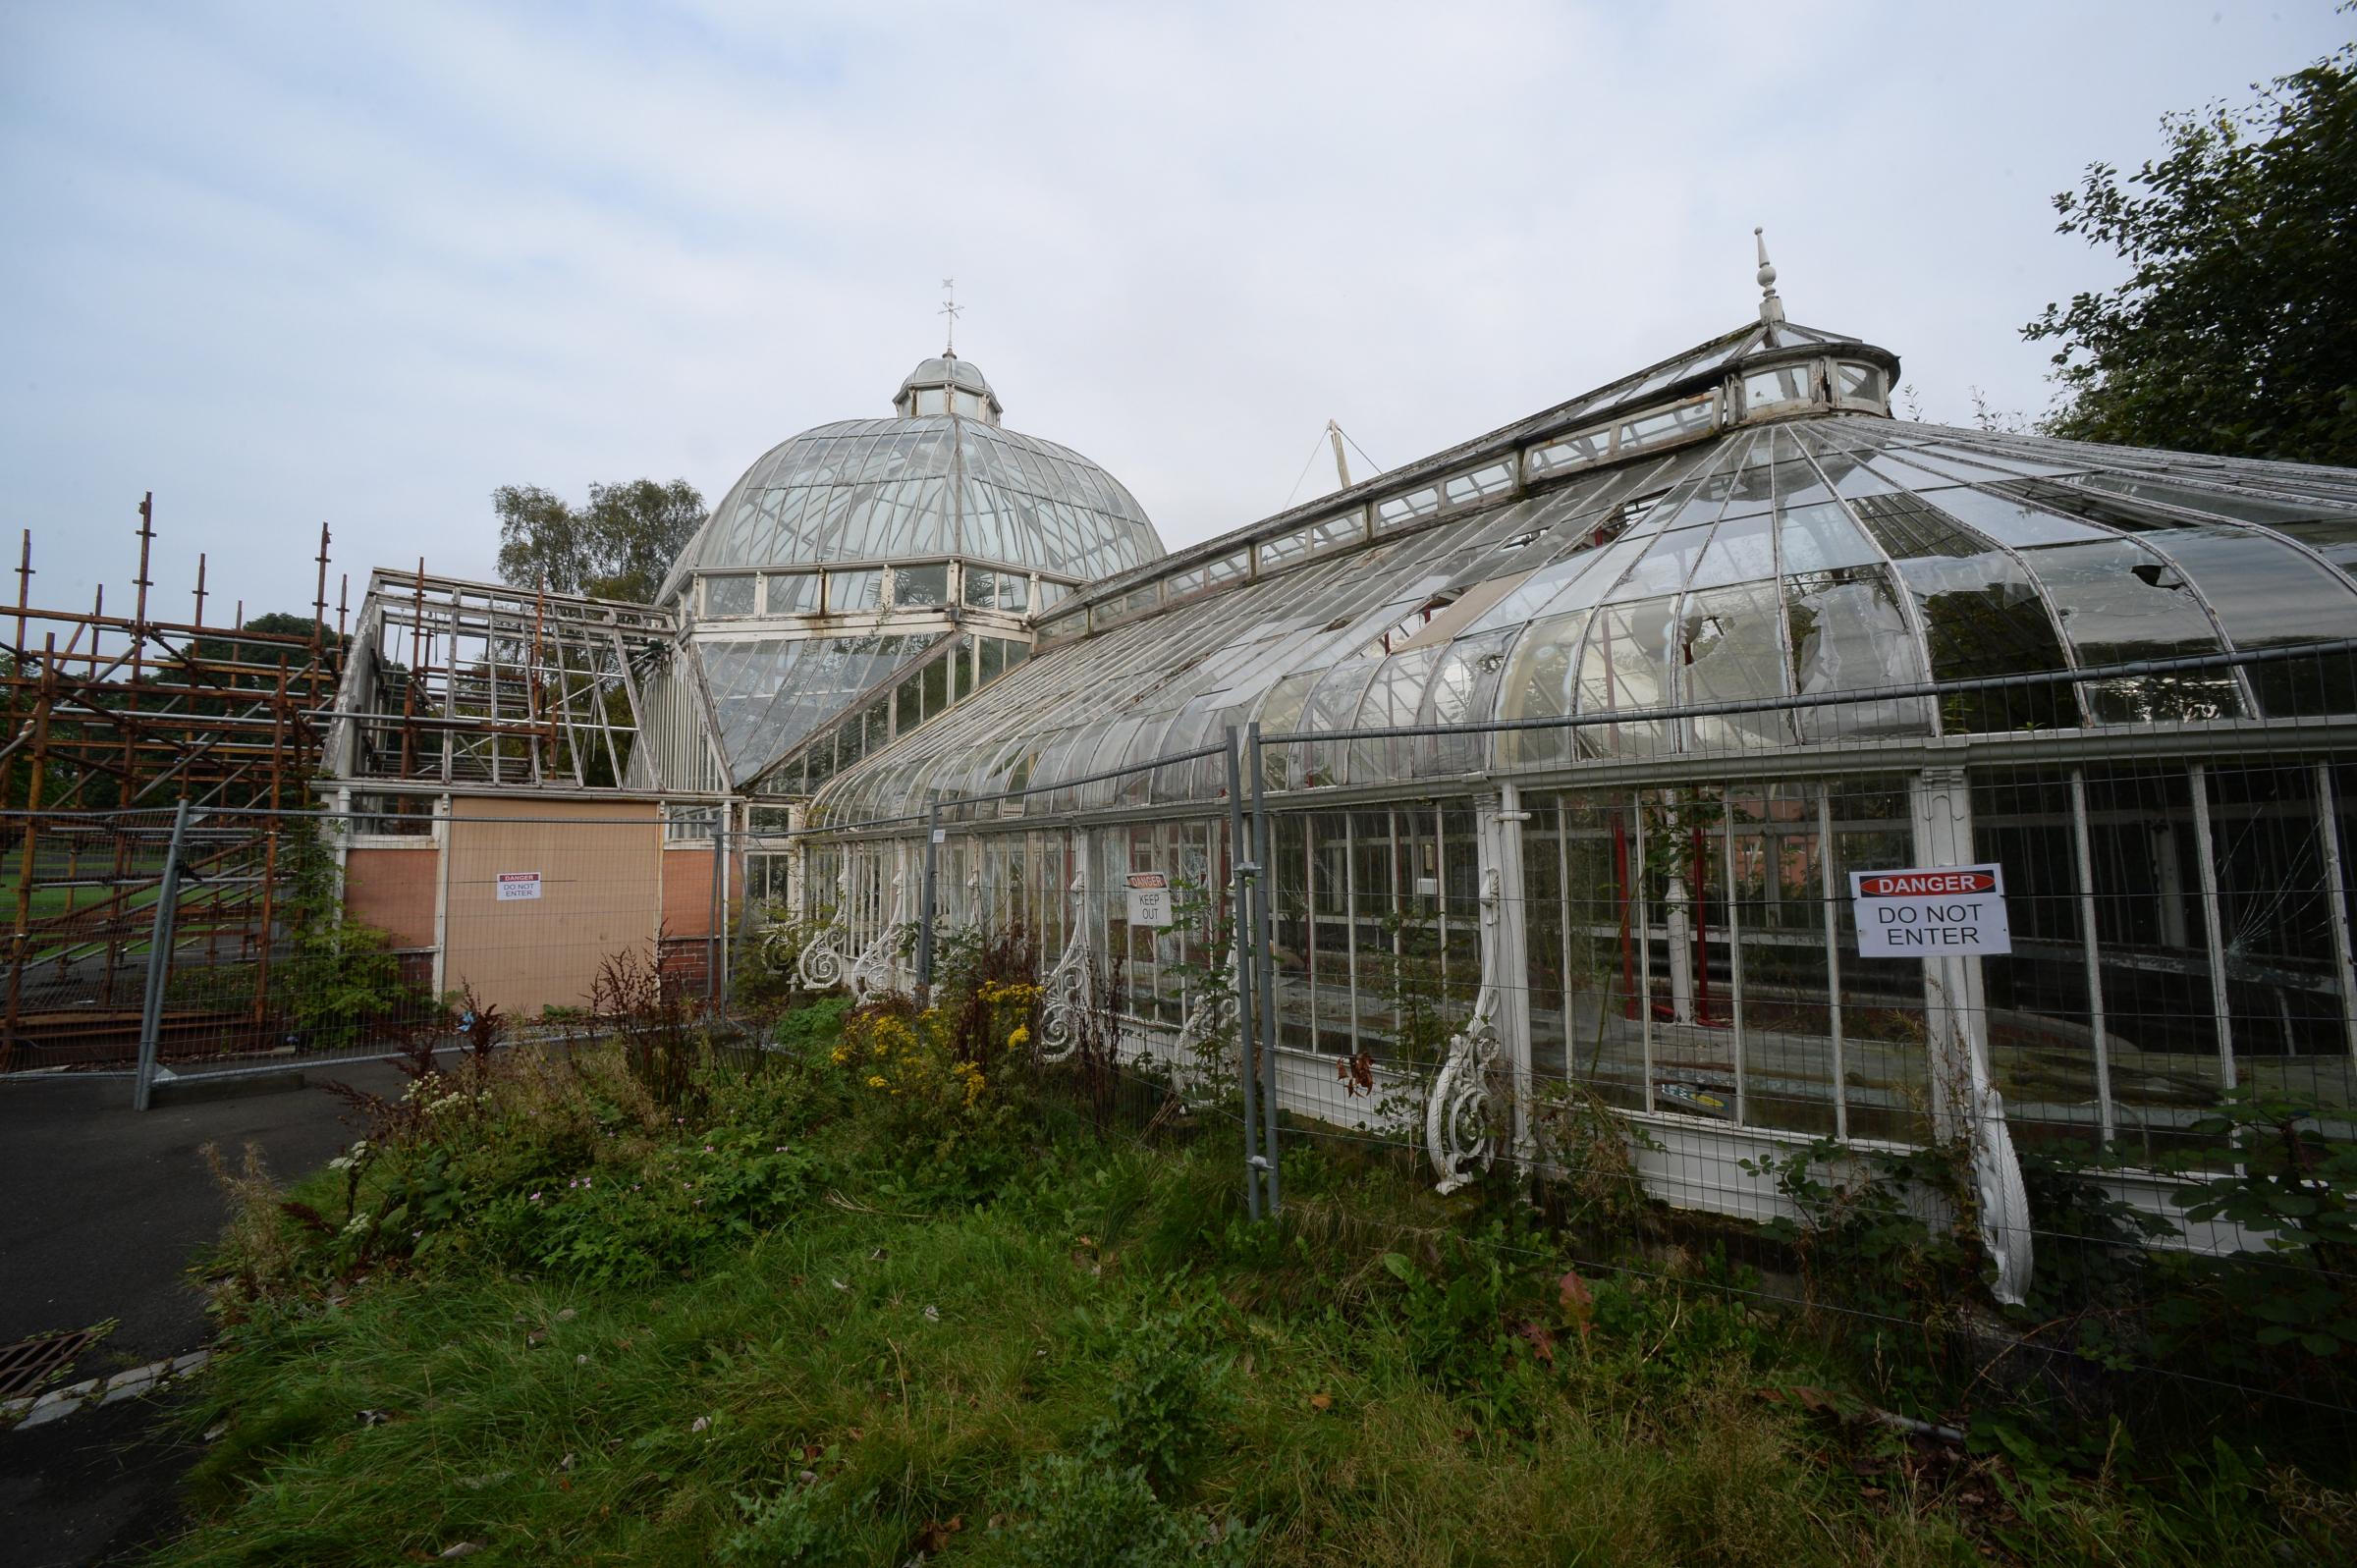 The winter gardens in the East End which closed more than 10 years ago